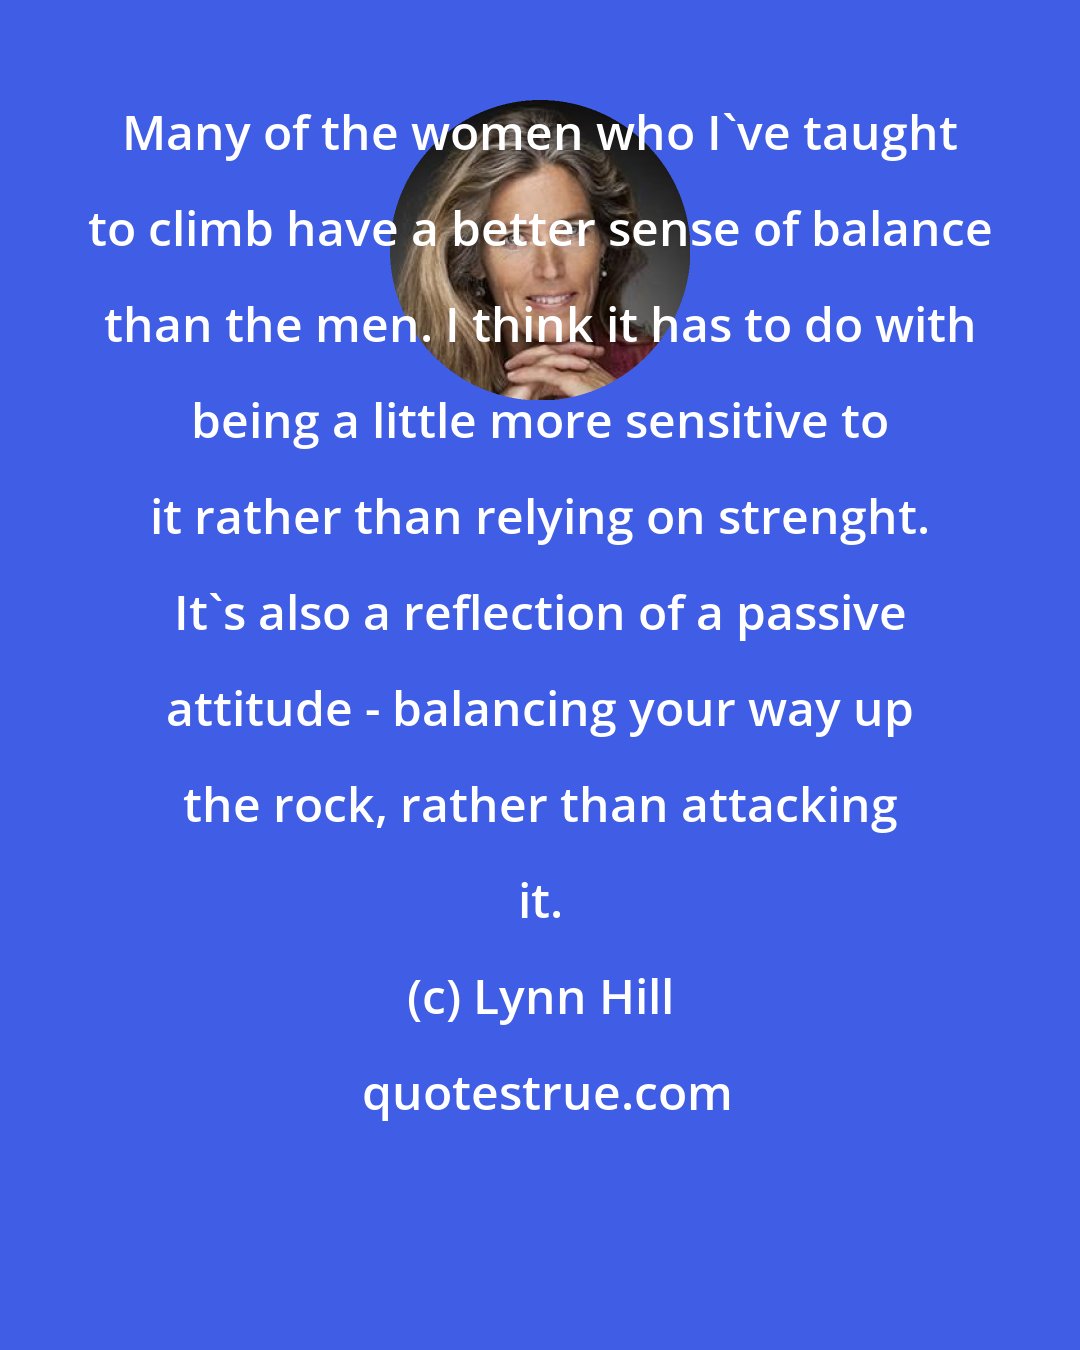 Lynn Hill: Many of the women who I've taught to climb have a better sense of balance than the men. I think it has to do with being a little more sensitive to it rather than relying on strenght. It's also a reflection of a passive attitude - balancing your way up the rock, rather than attacking it.